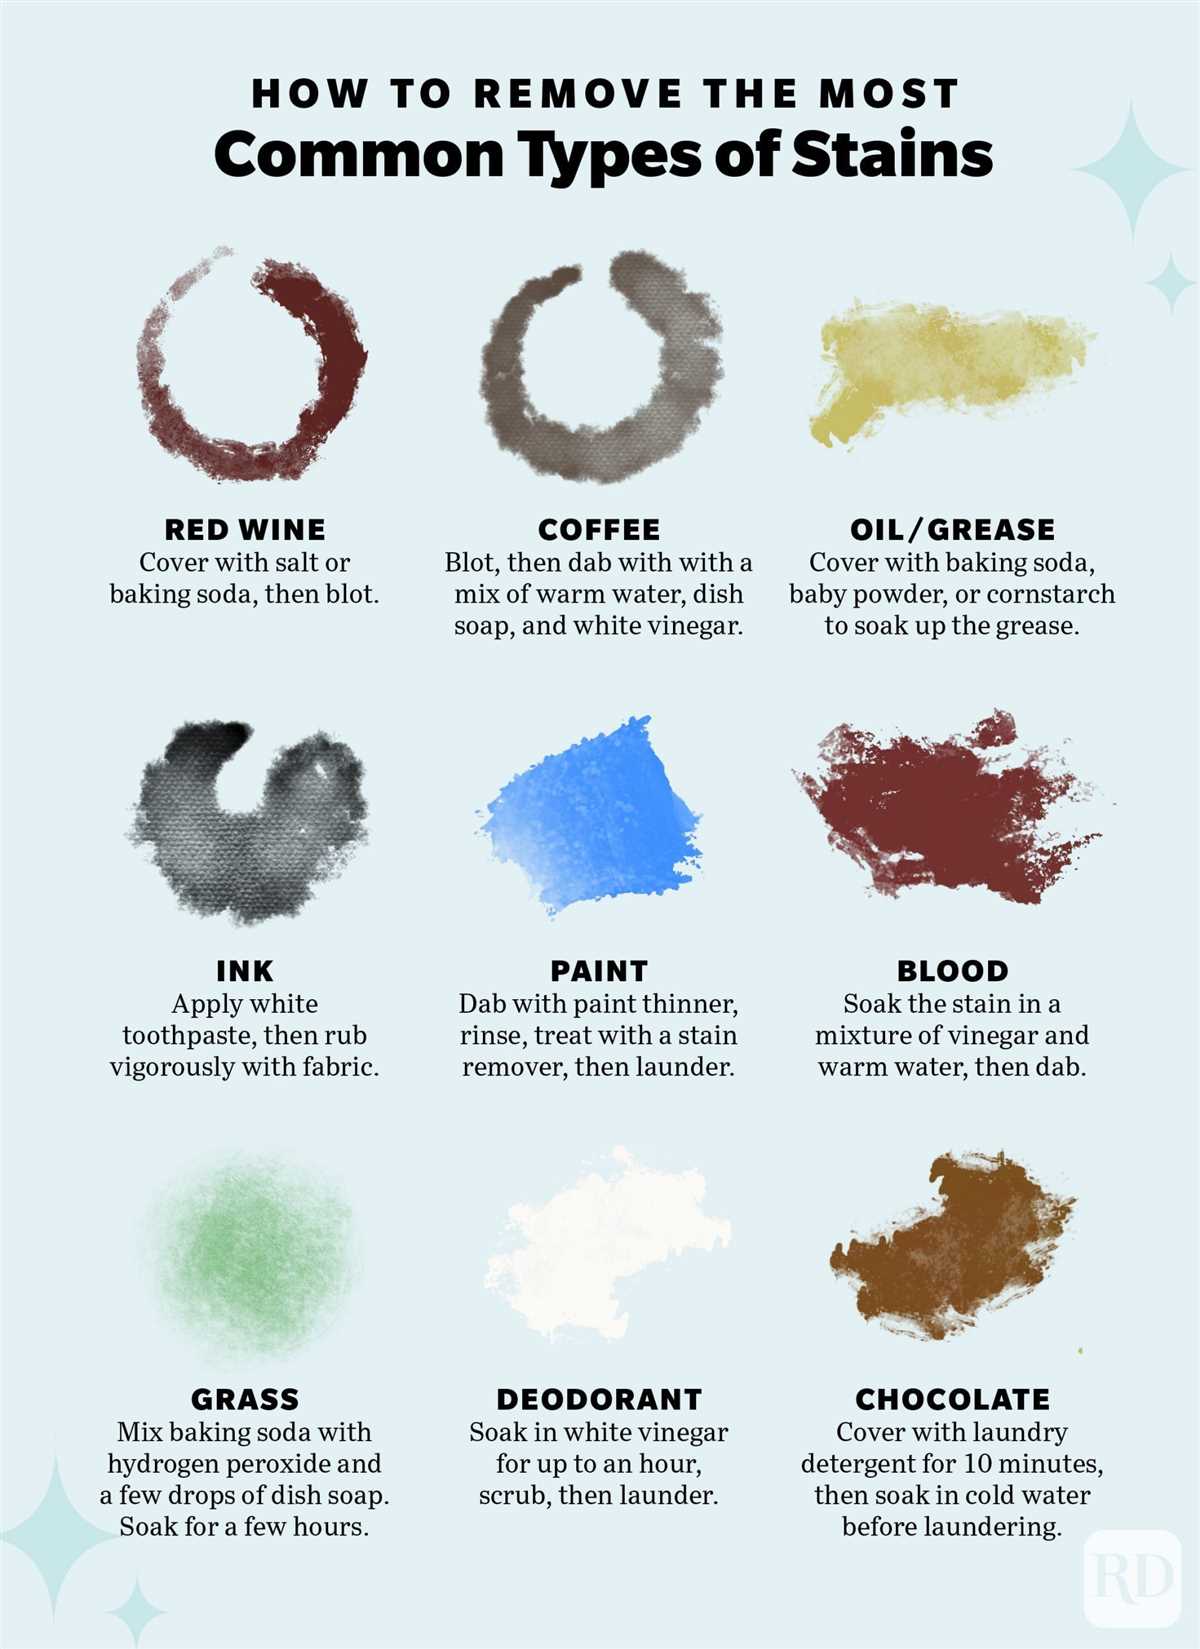 1. Red Wine Stains